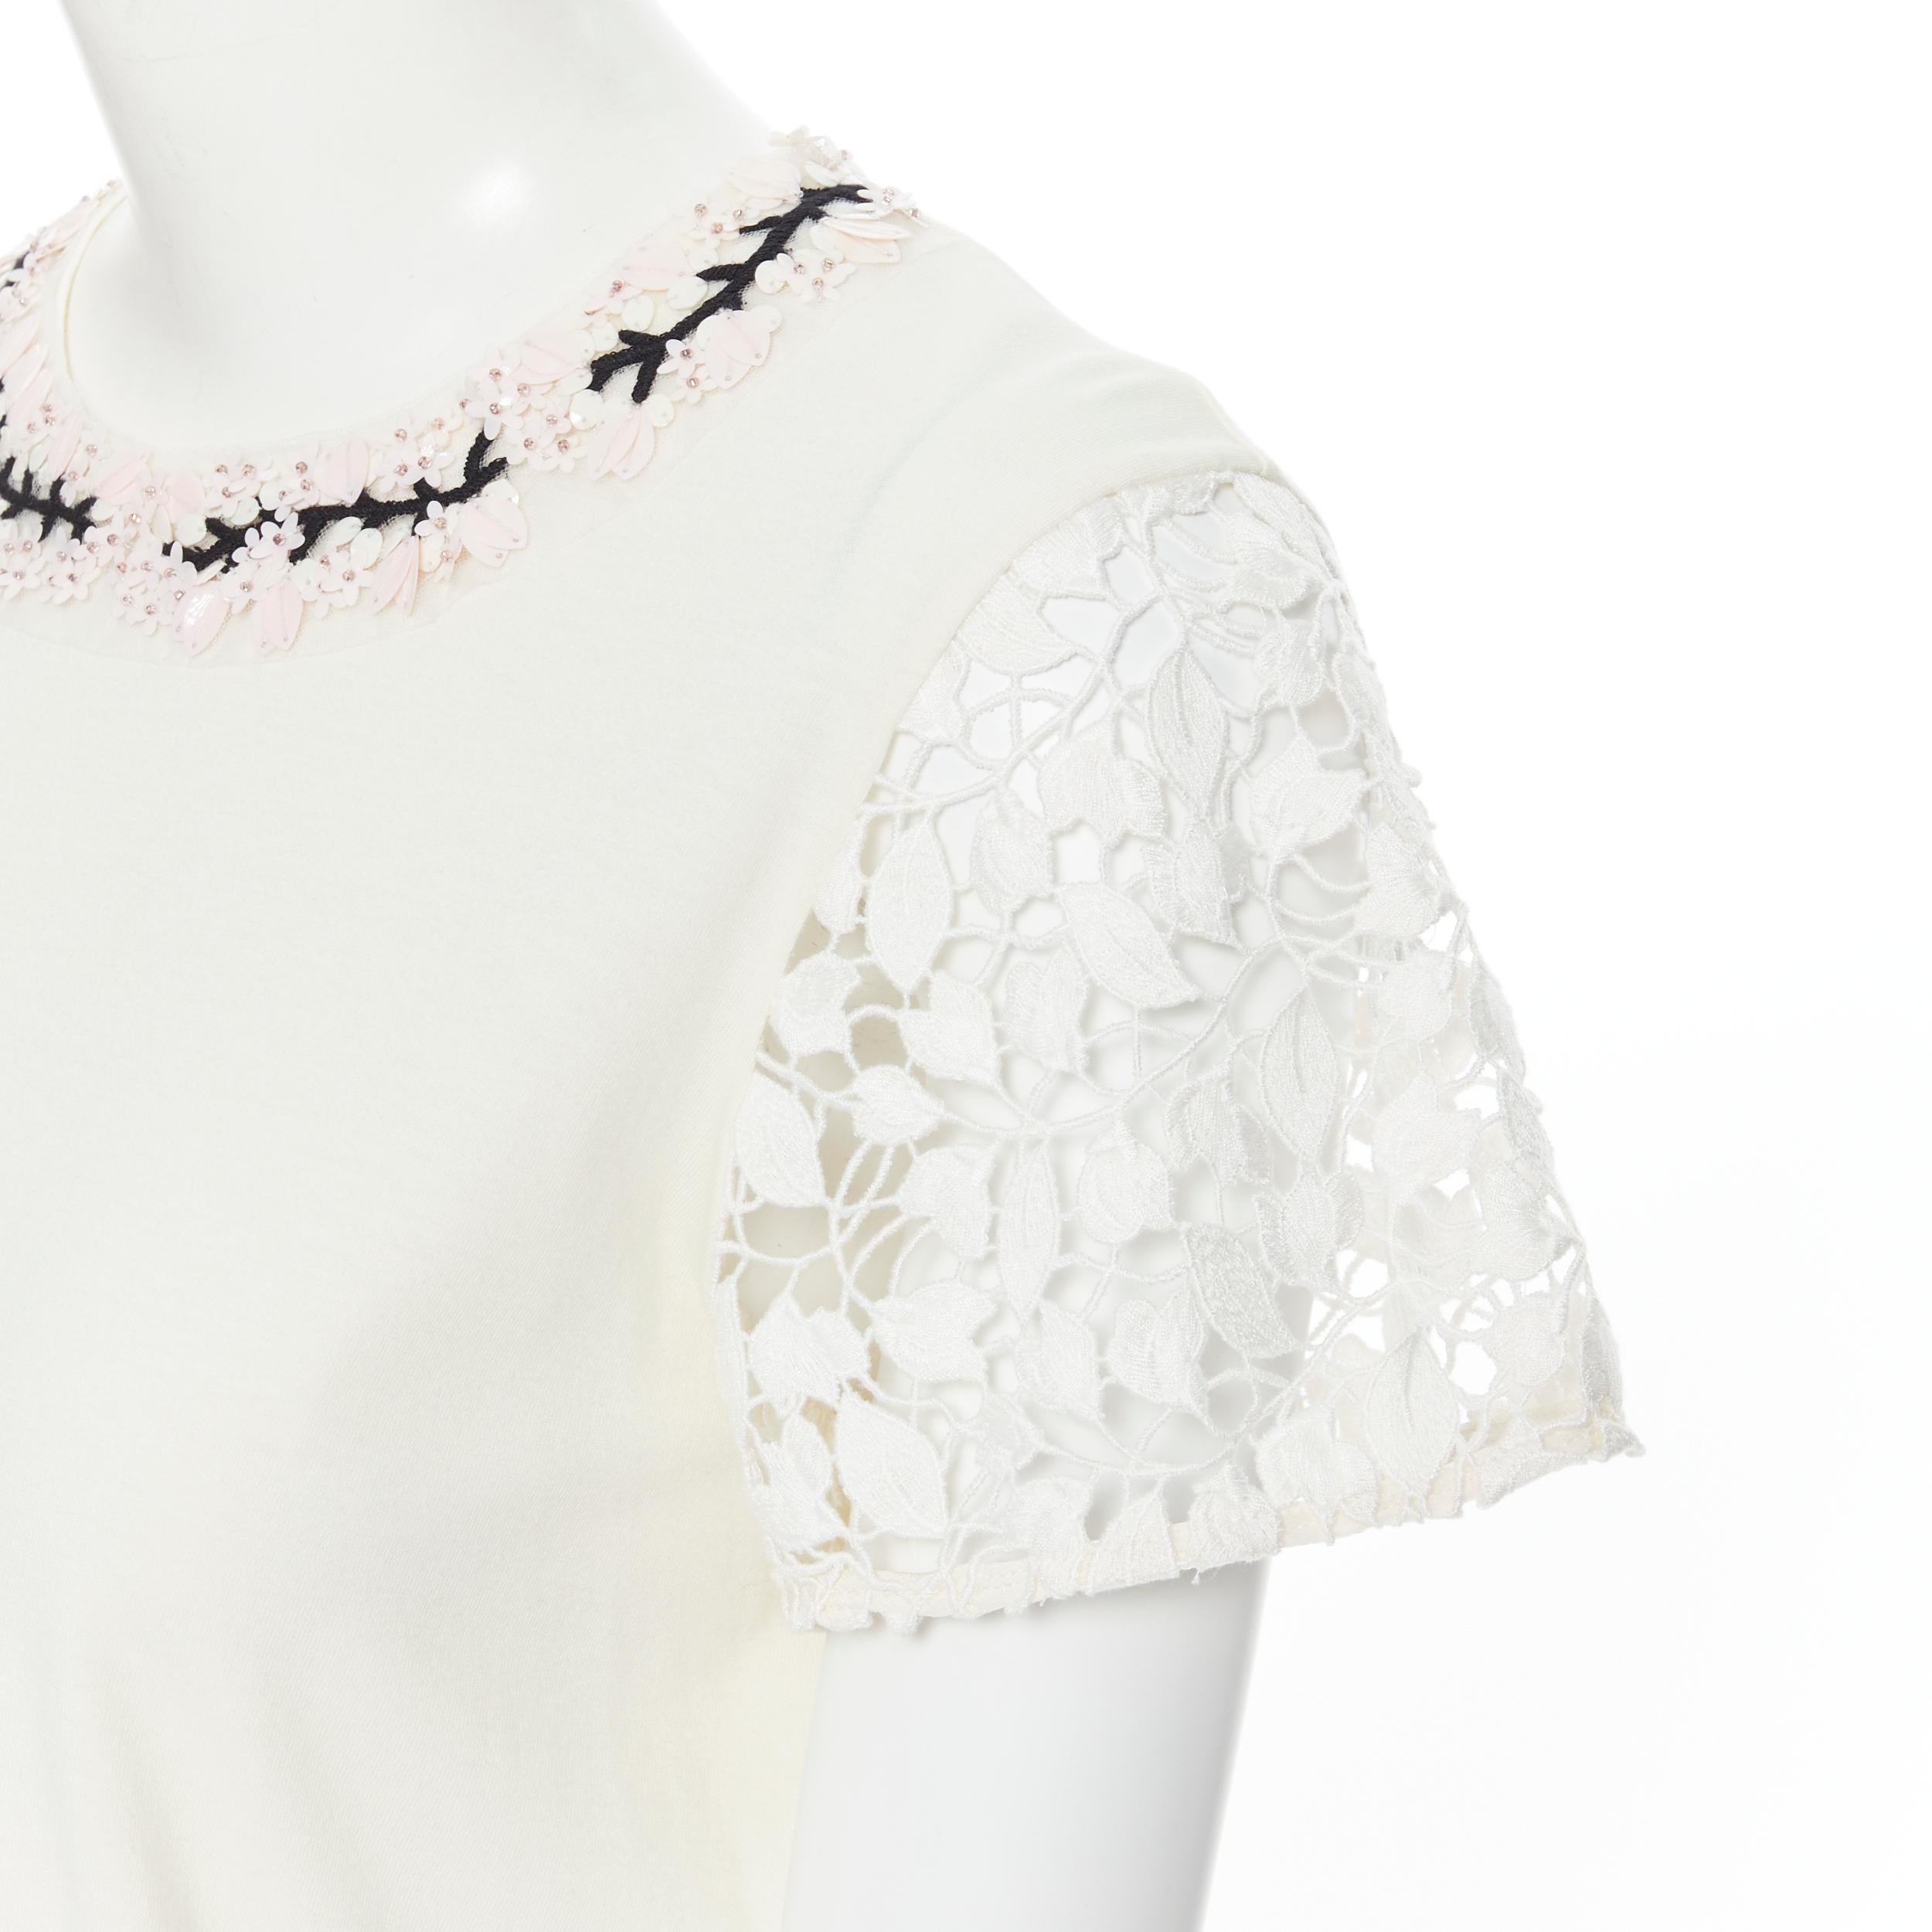 GIAMBATTISTA VALLI cream blossom sequin embellished lace sleeve t-shirt XS 
Reference: LNKO/A01731 
Brand: Giambattista Valli 
Designer: Giambattista Valli 
Material: Cotton 
Color: Beige 
Pattern: Floral 
Extra Detail: Crew neck. Pink blossom